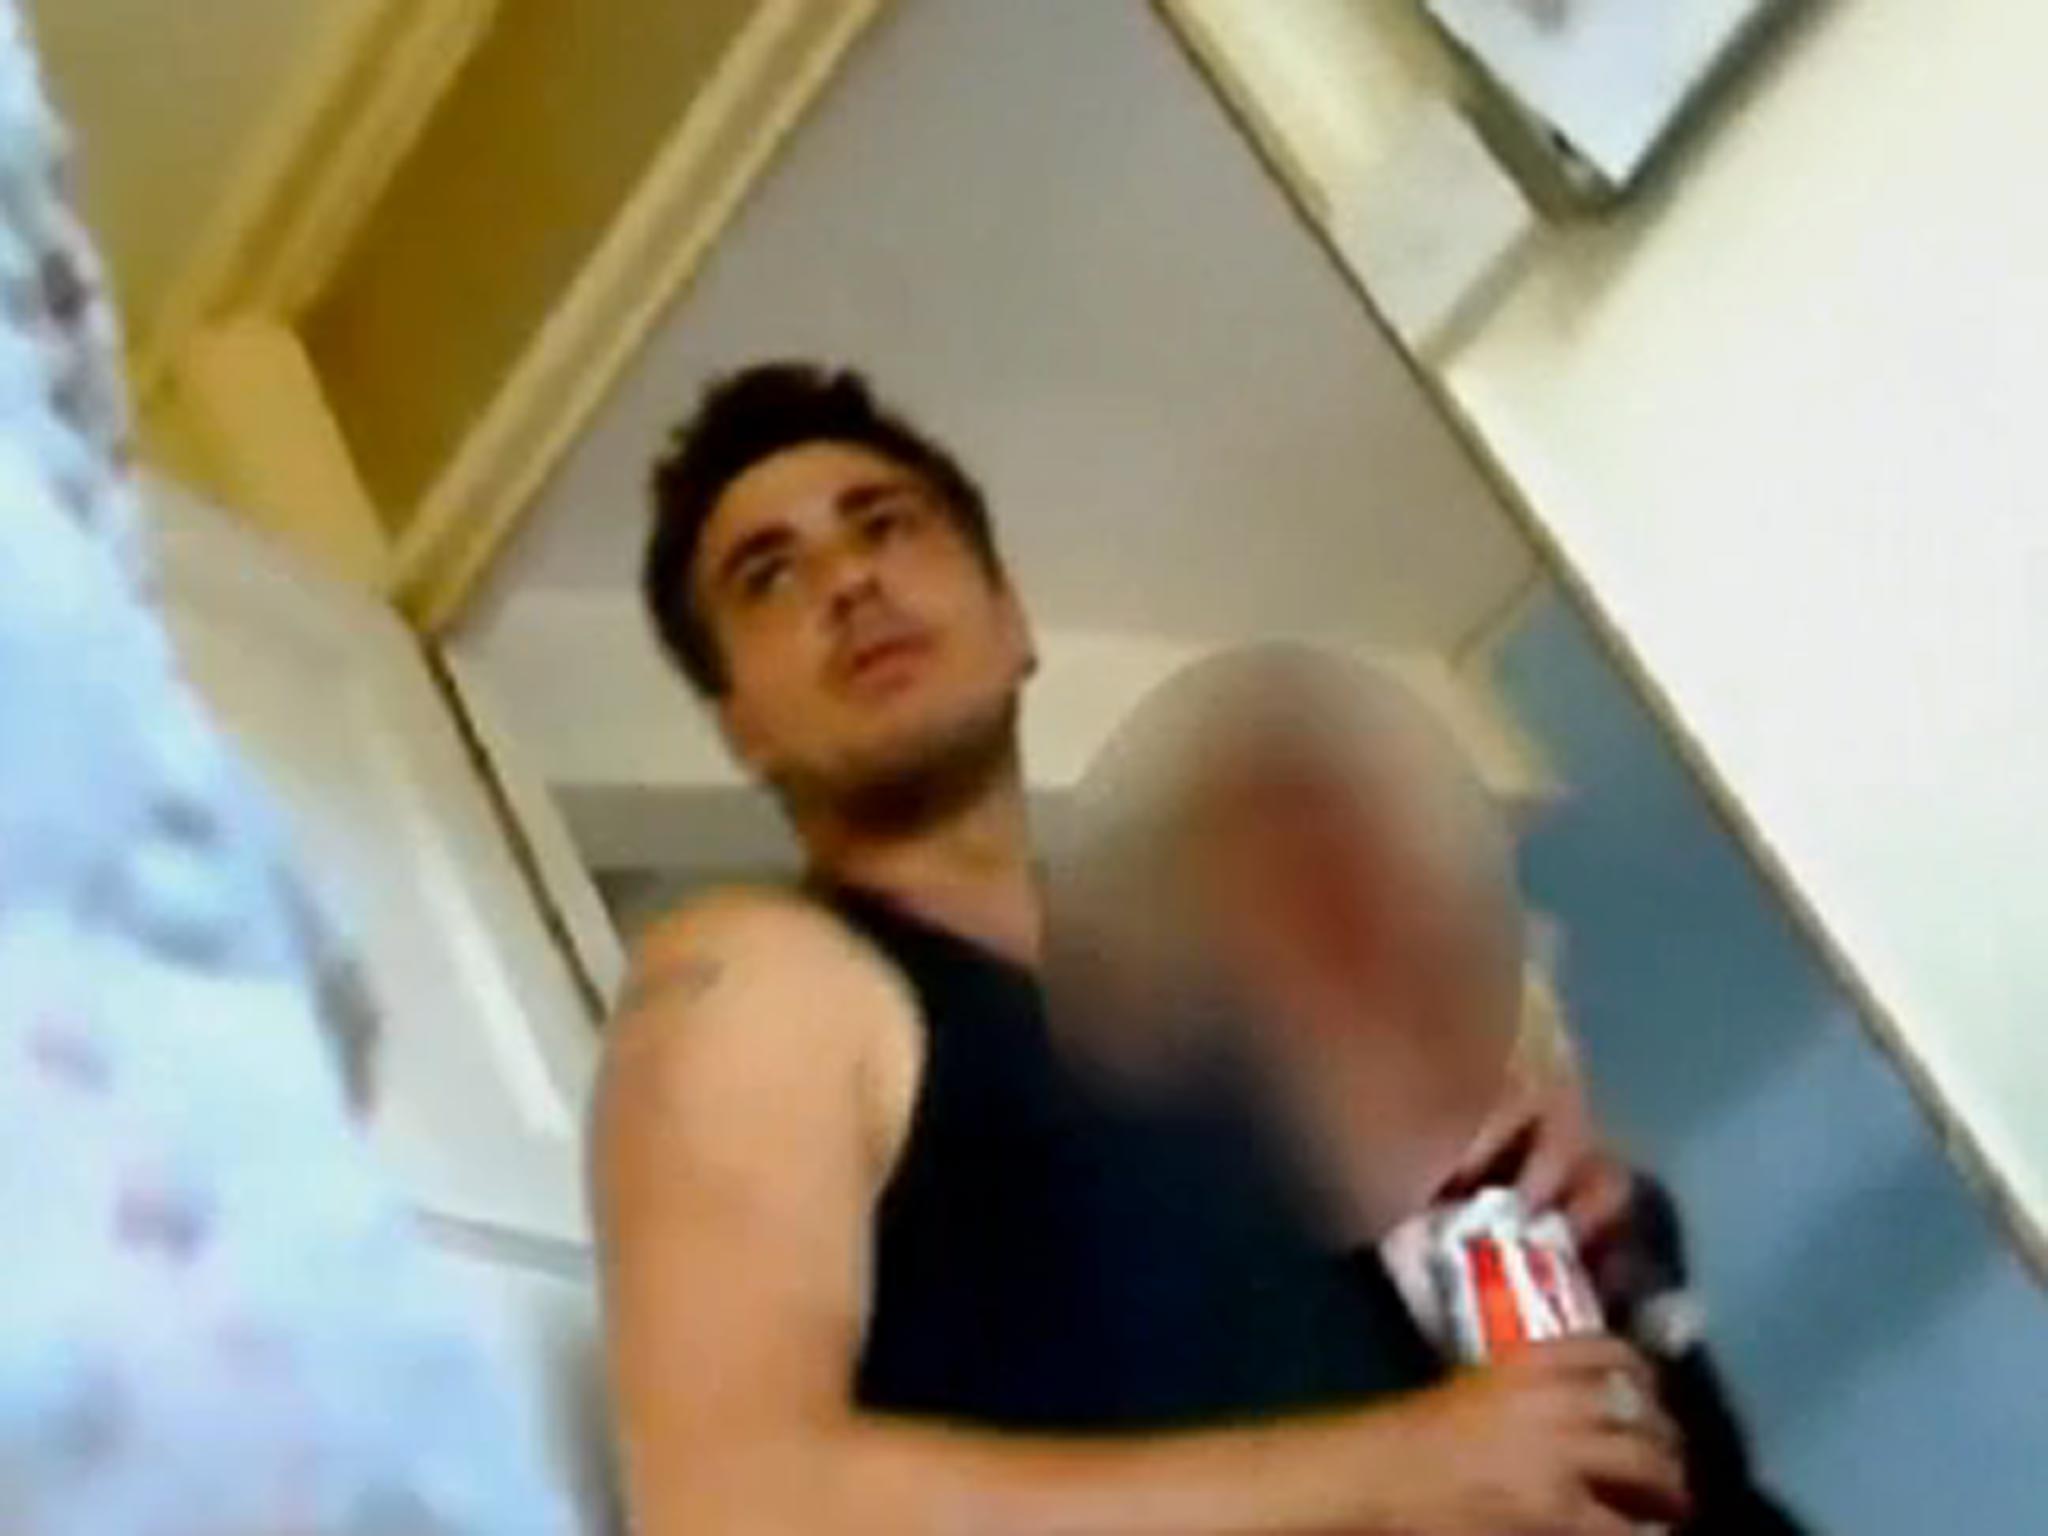 A screengrab from a video taken by the victim Bijan Ebrahimi, where Lee James can see been verbally abusing him